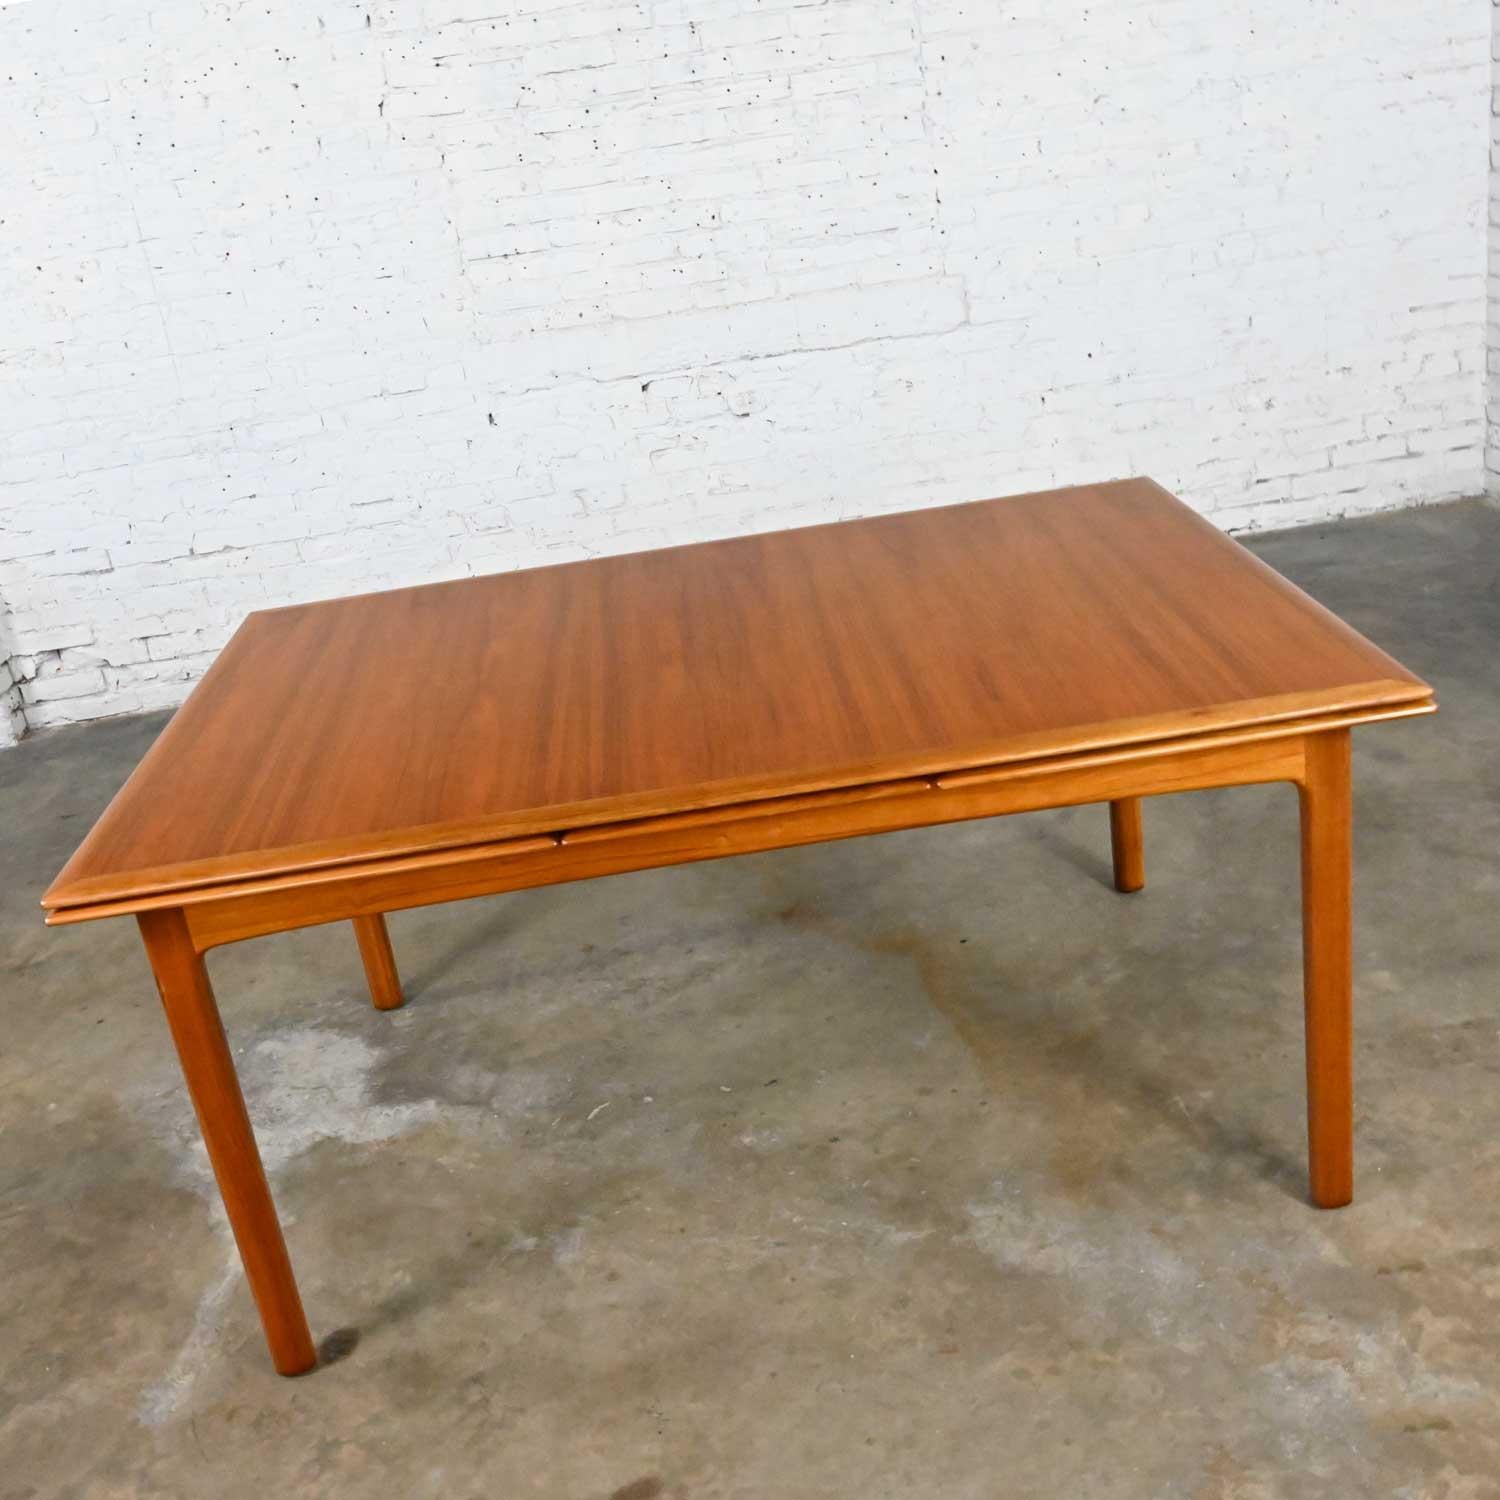 DUX Scandinavian Modern Teak Draw Leaf Extending Dining Table by Folke Ohlsson  In Good Condition For Sale In Topeka, KS